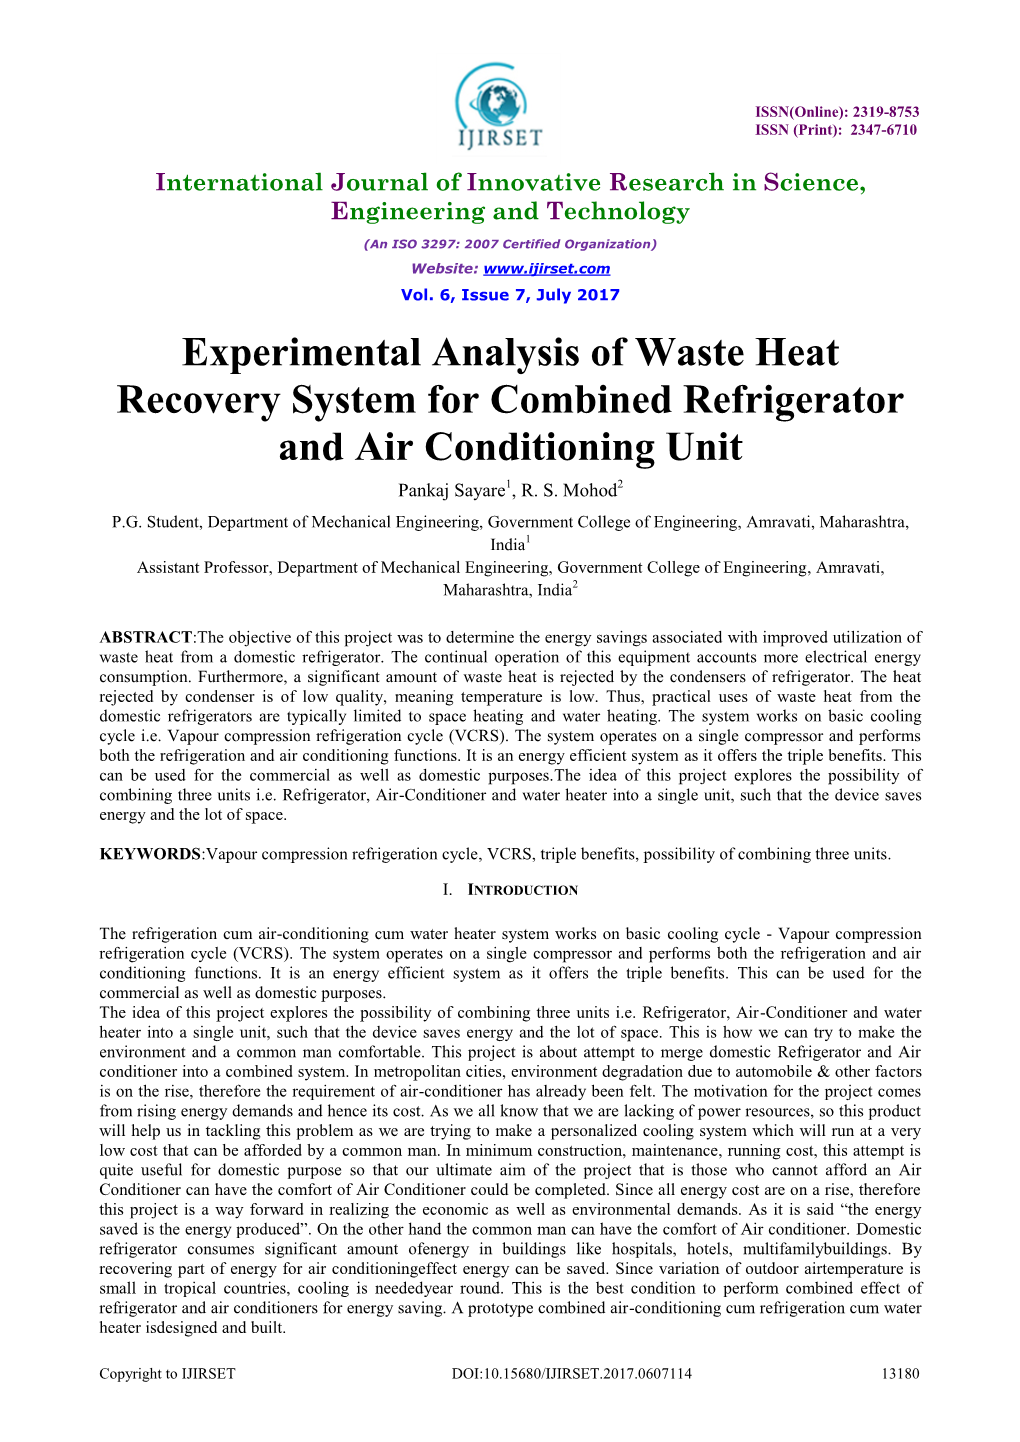 Experimental Analysis of Waste Heat Recovery System for Combined Refrigerator and Air Conditioning Unit Pankaj Sayare1, R